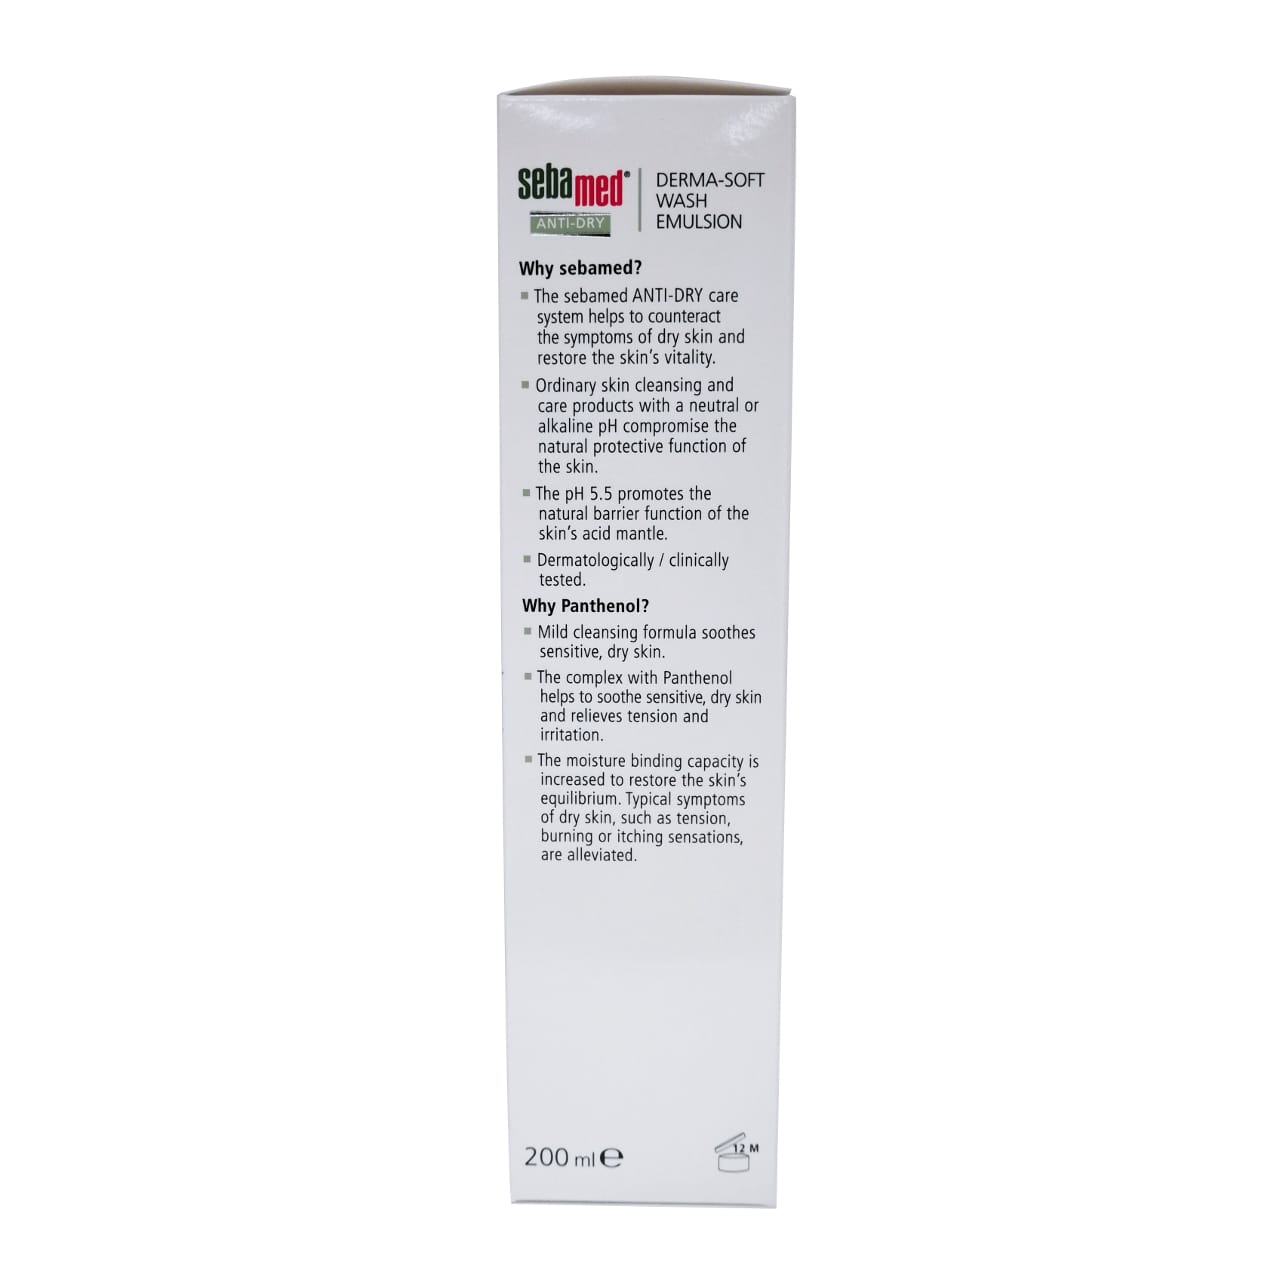 Product details for Sebamed Anti-Dry Derma-Soft Wash Emulsion in English 1 of 2